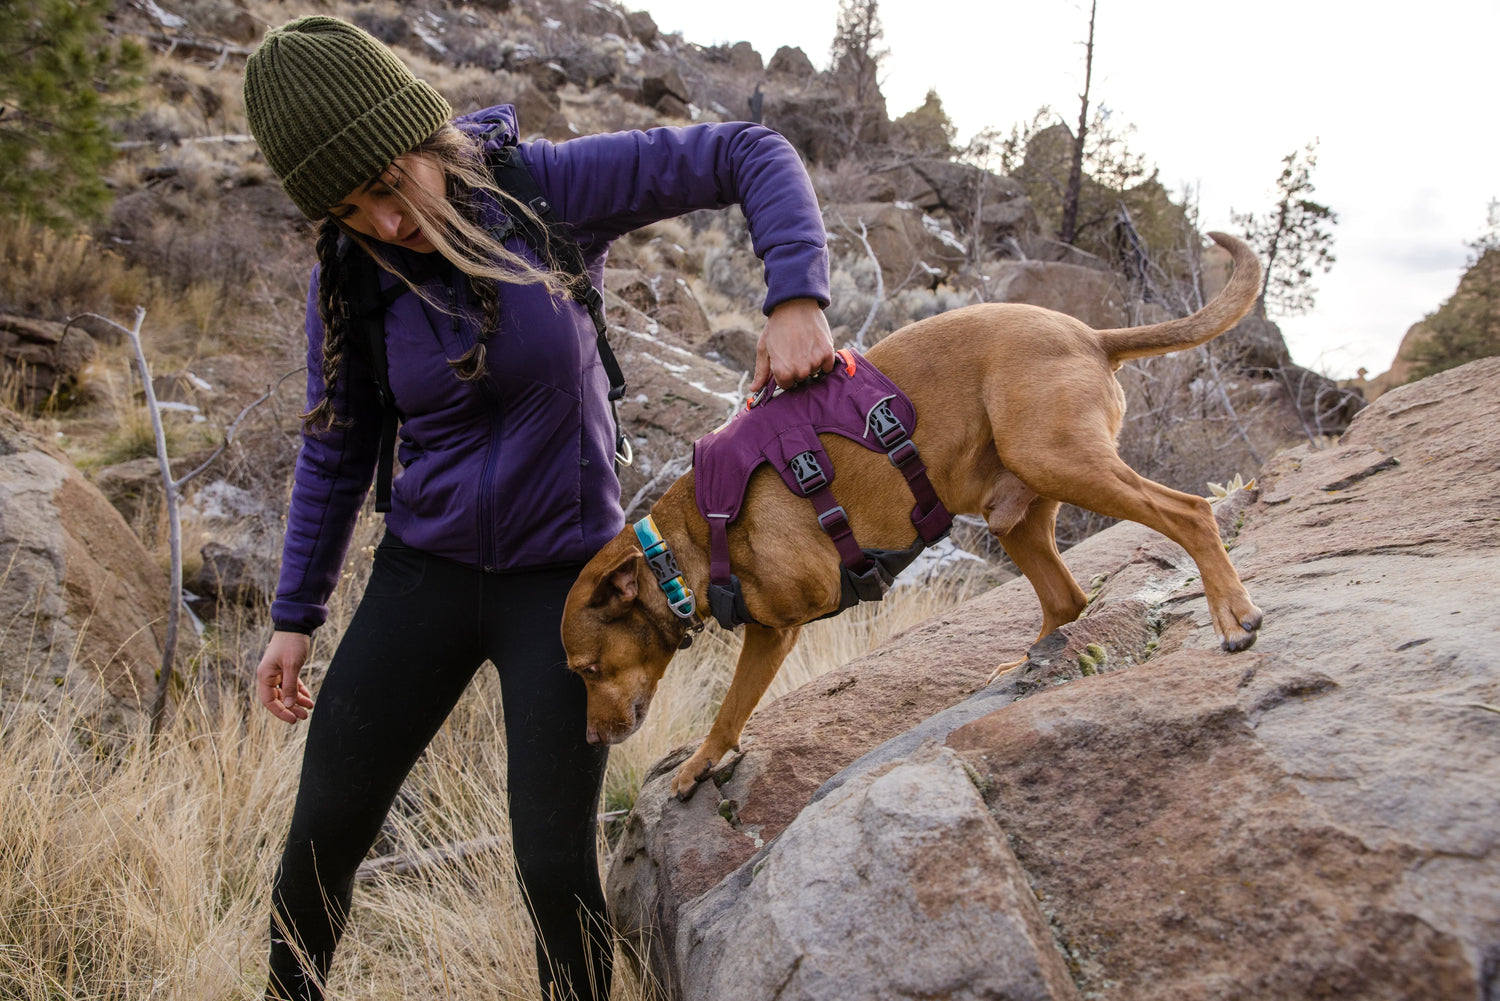 Different Types of Dog Leashes: How To Pick The Best Dog Training Leash?